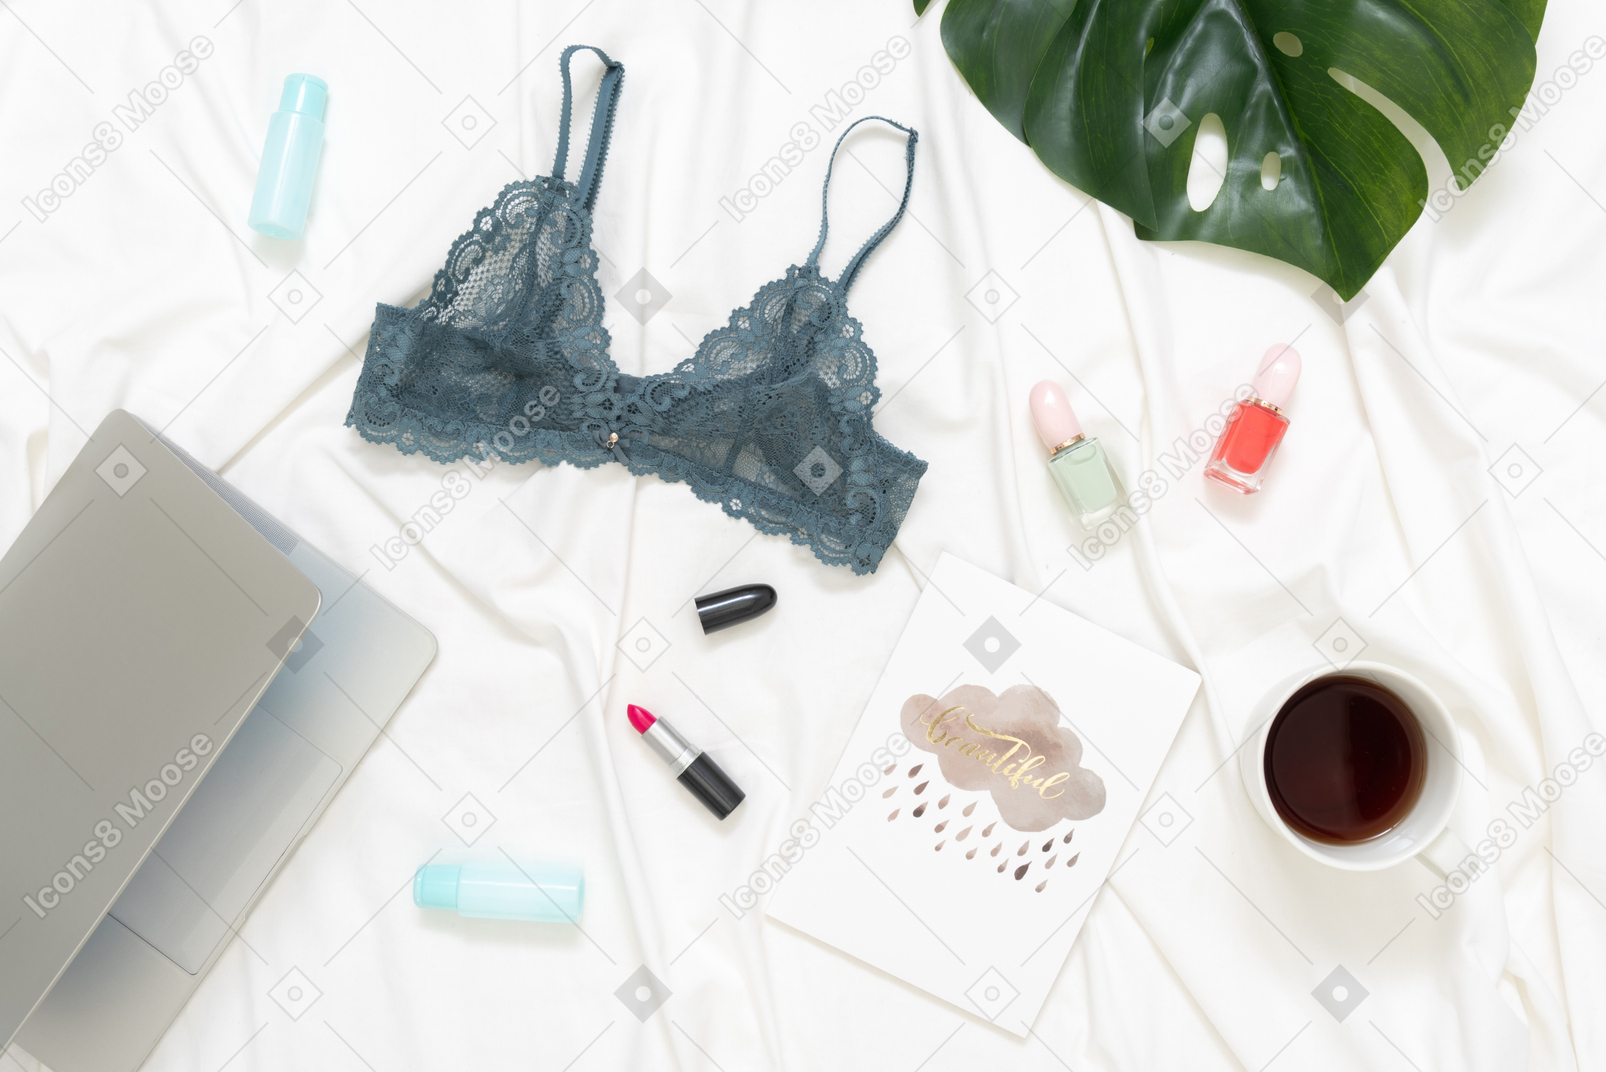 Blue lace lingerie, coffee cup and cosmetic bottles